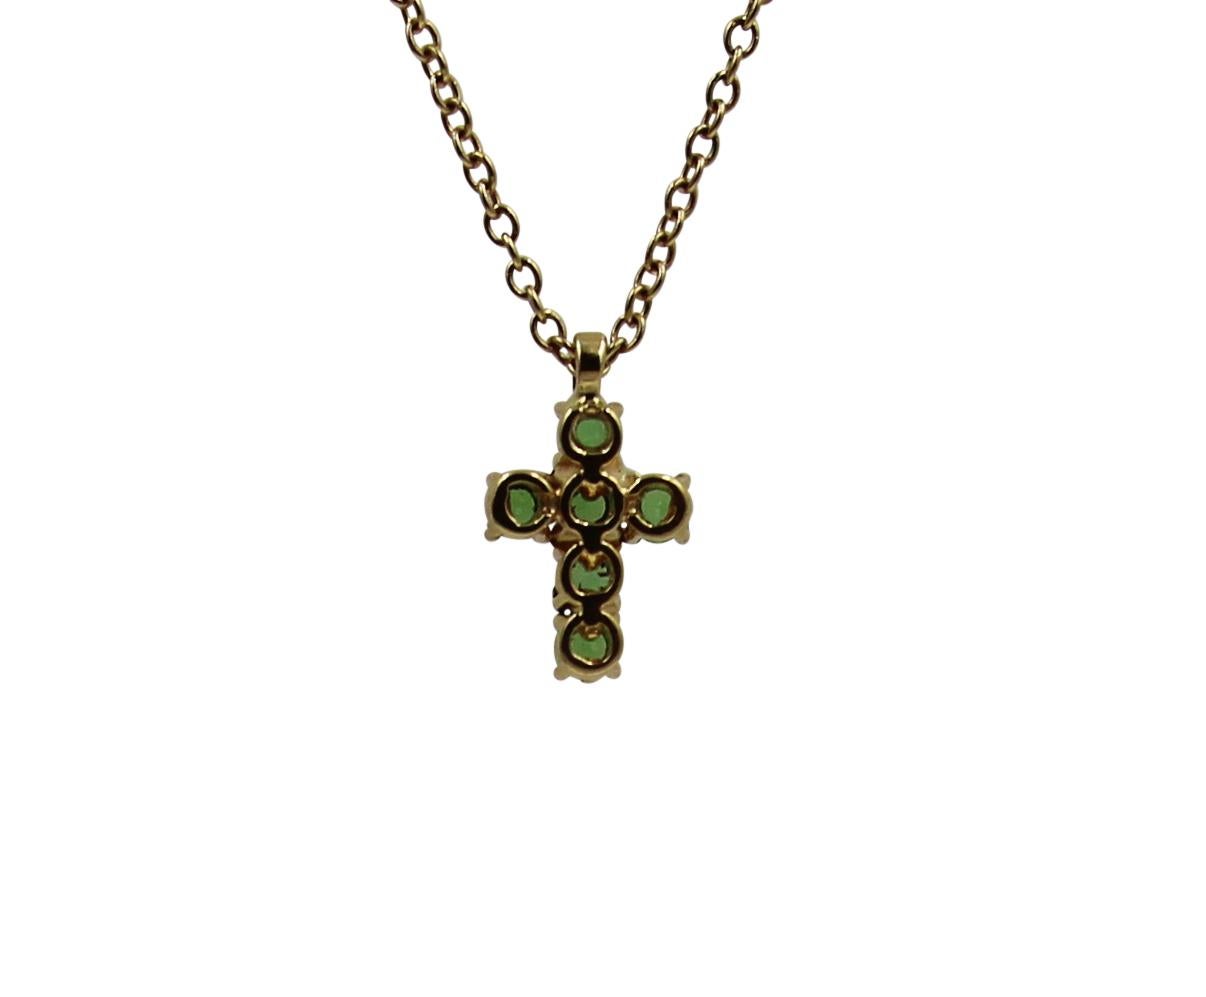 Cute Cross Pendant on Chain set with 0.25 Carat with Apple Green Tsavorite Garnet in 18 Karat Yellow Gold with Brown Rhodium. Chain length 40 cm/15.7 in.
We can make this style in 18k White or Rose gold. We can custom make necklace according to your